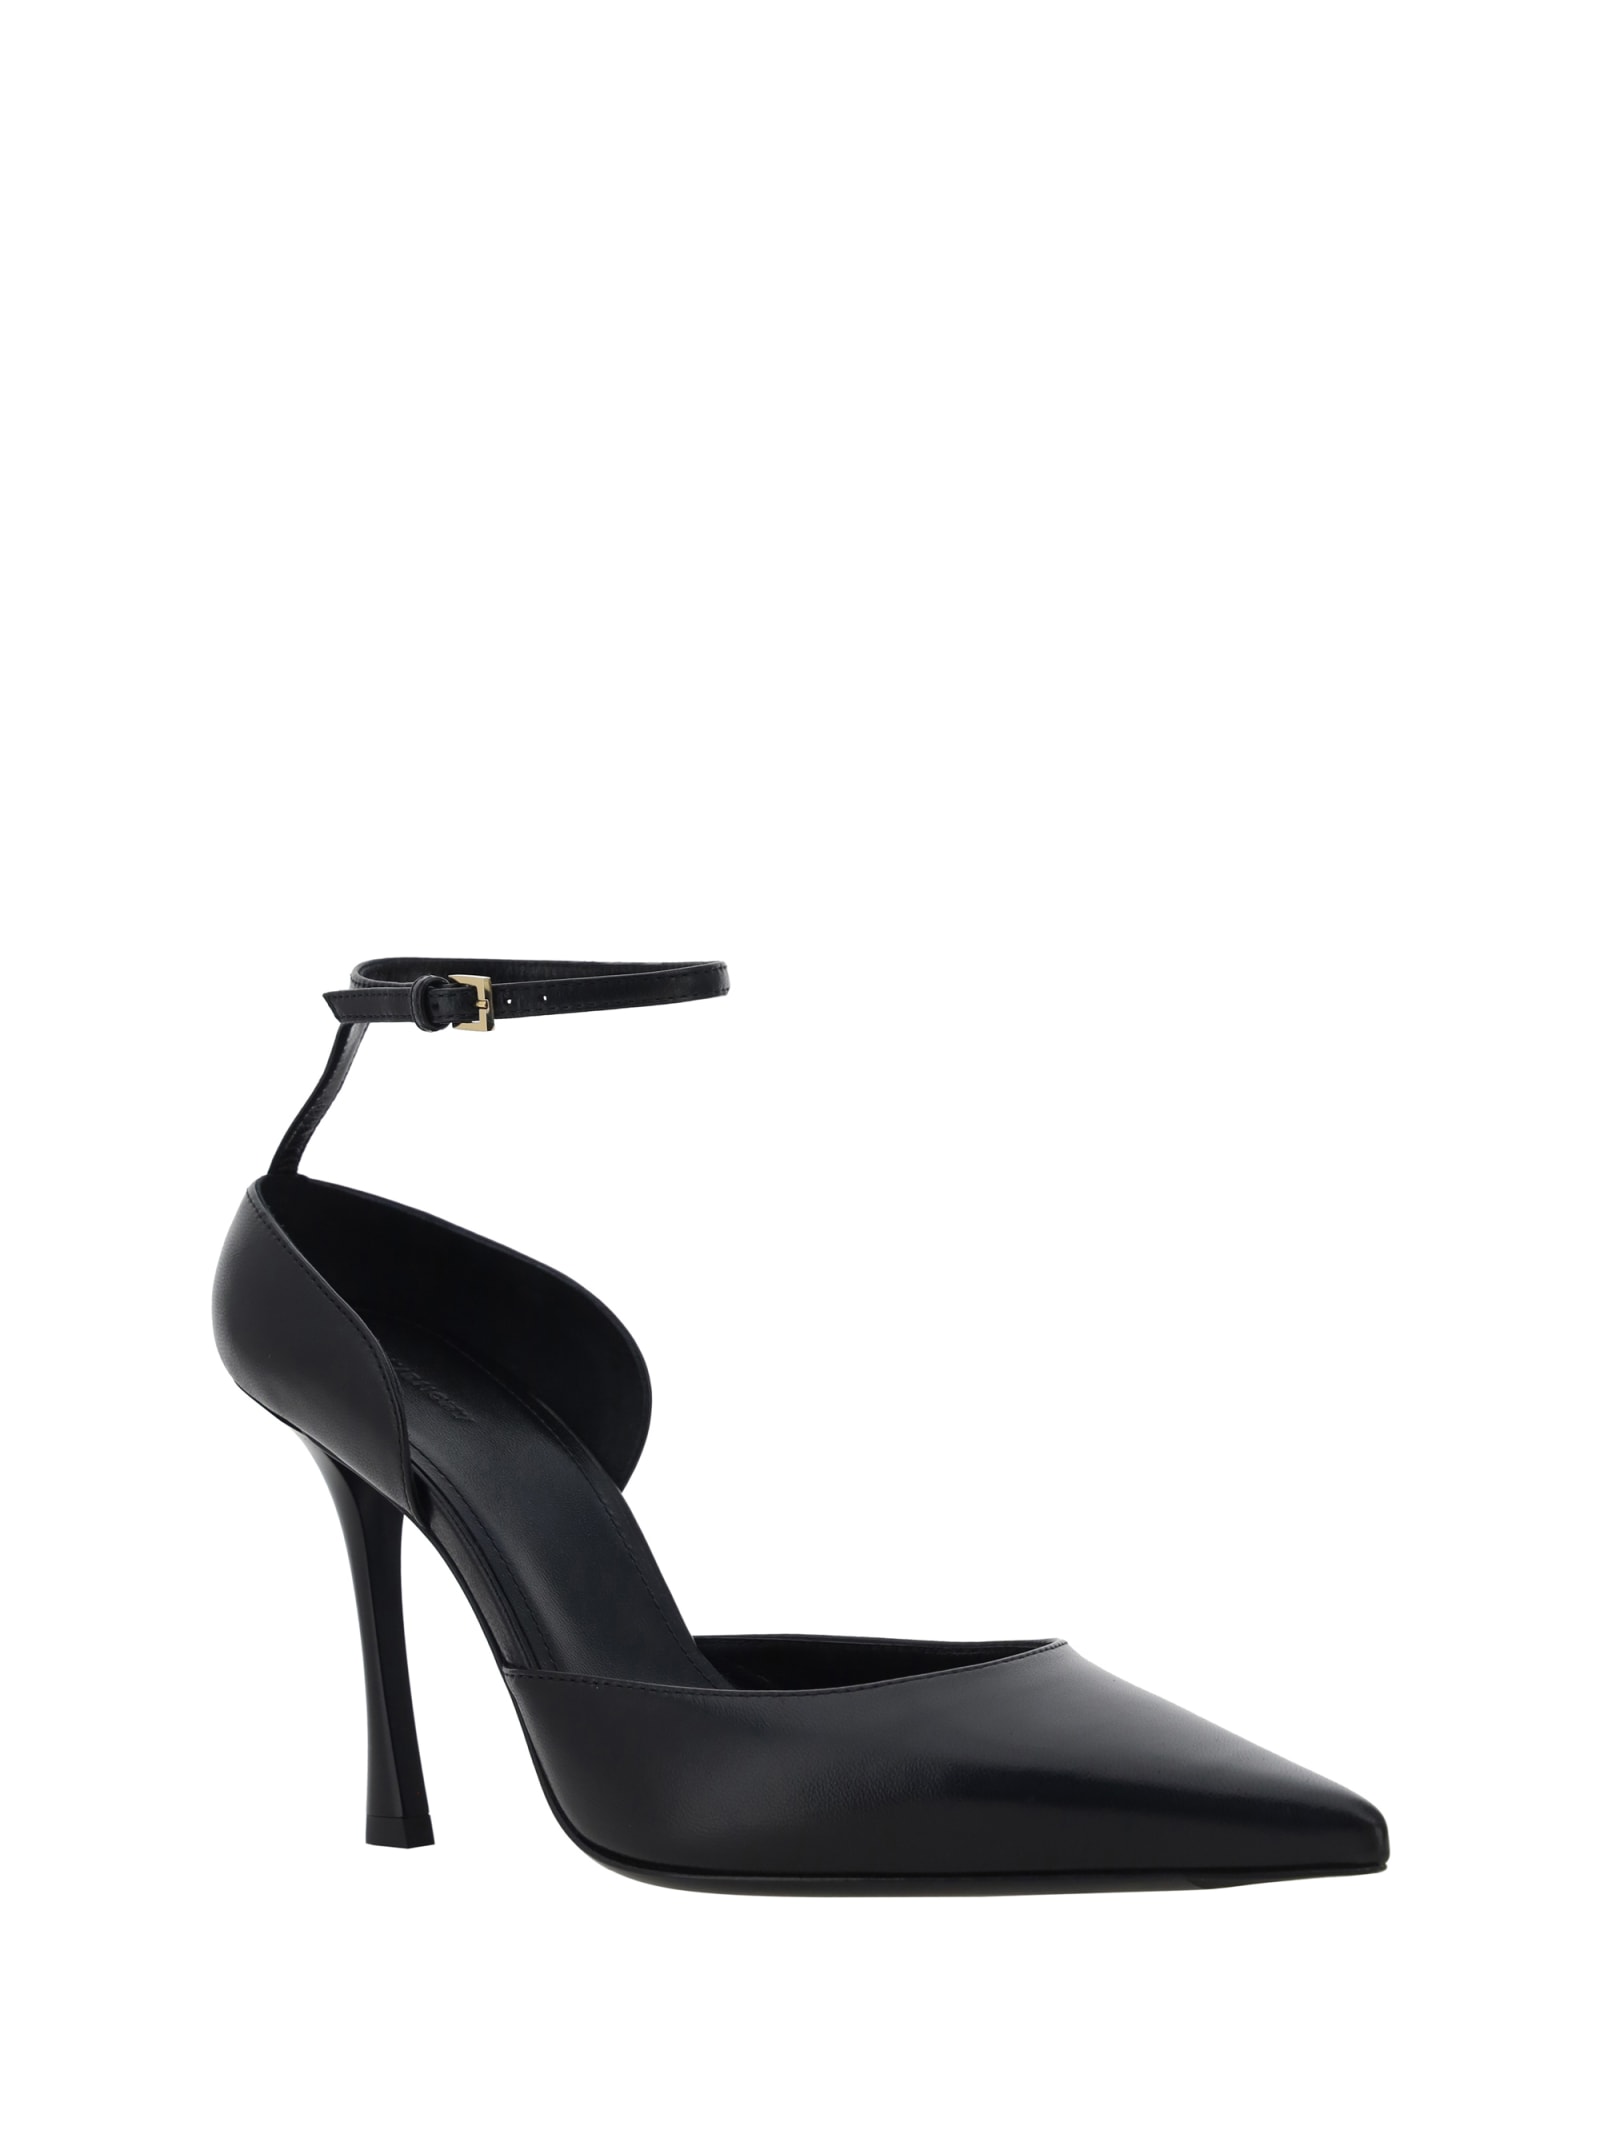 Shop Givenchy Show Stocking Pumps In Black